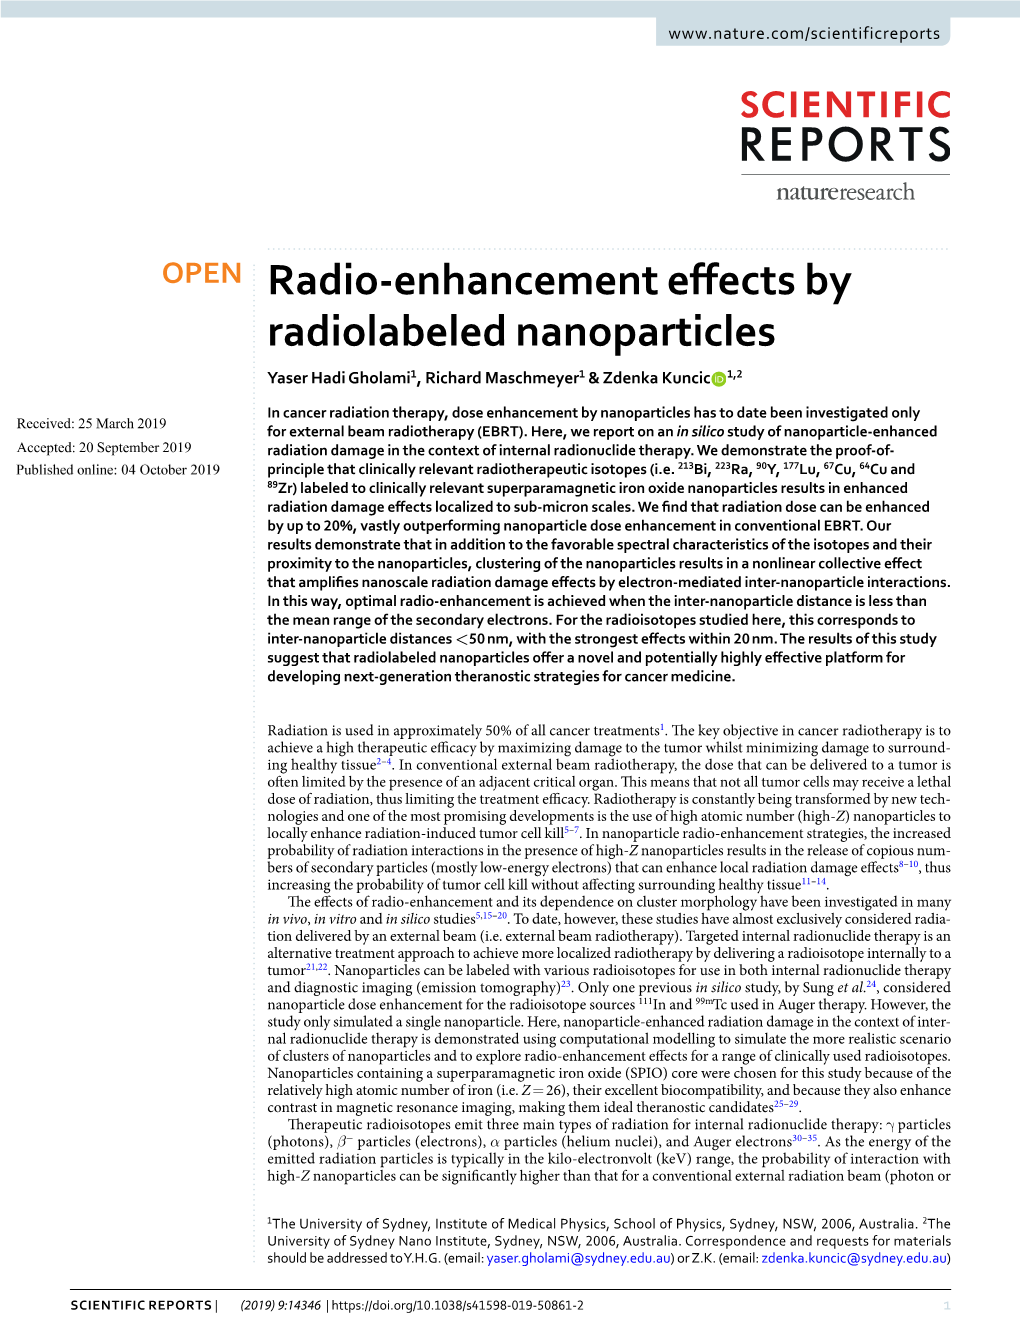 Radio-Enhancement Effects by Radiolabeled Nanoparticles